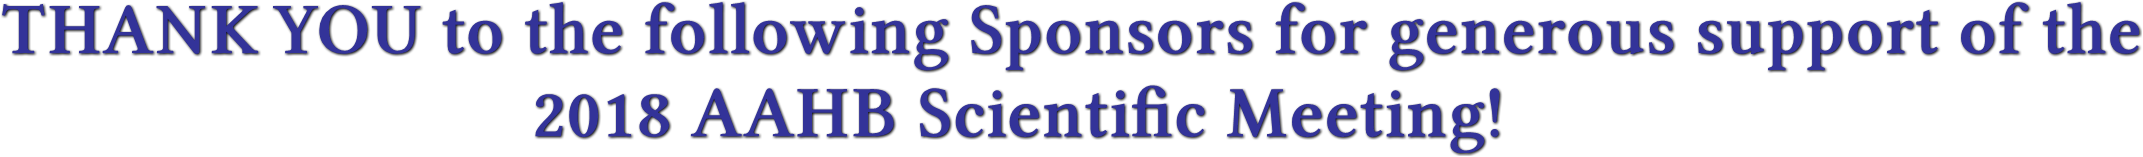 THANK YOU to the following Sponsors for generous support of the
                                               2018 AAHB Scientific Meeting!